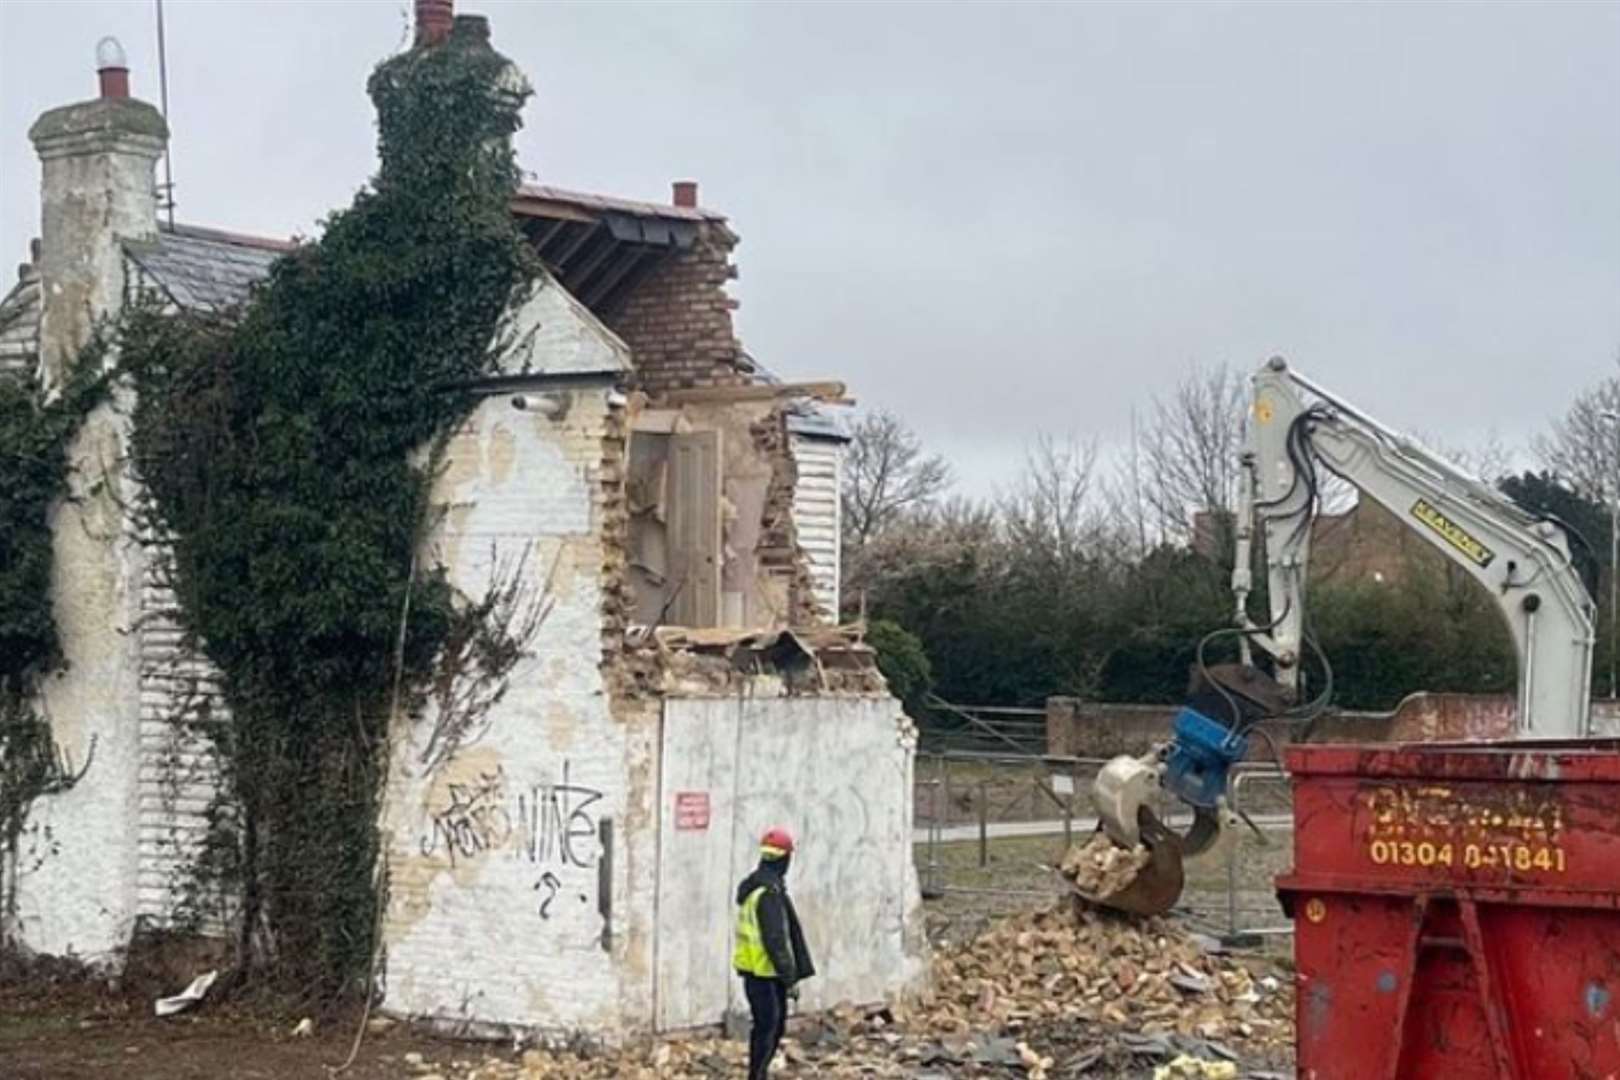 The Banksy painting near Herne Bay was demolished last month. Picture: Banksy/Instagram